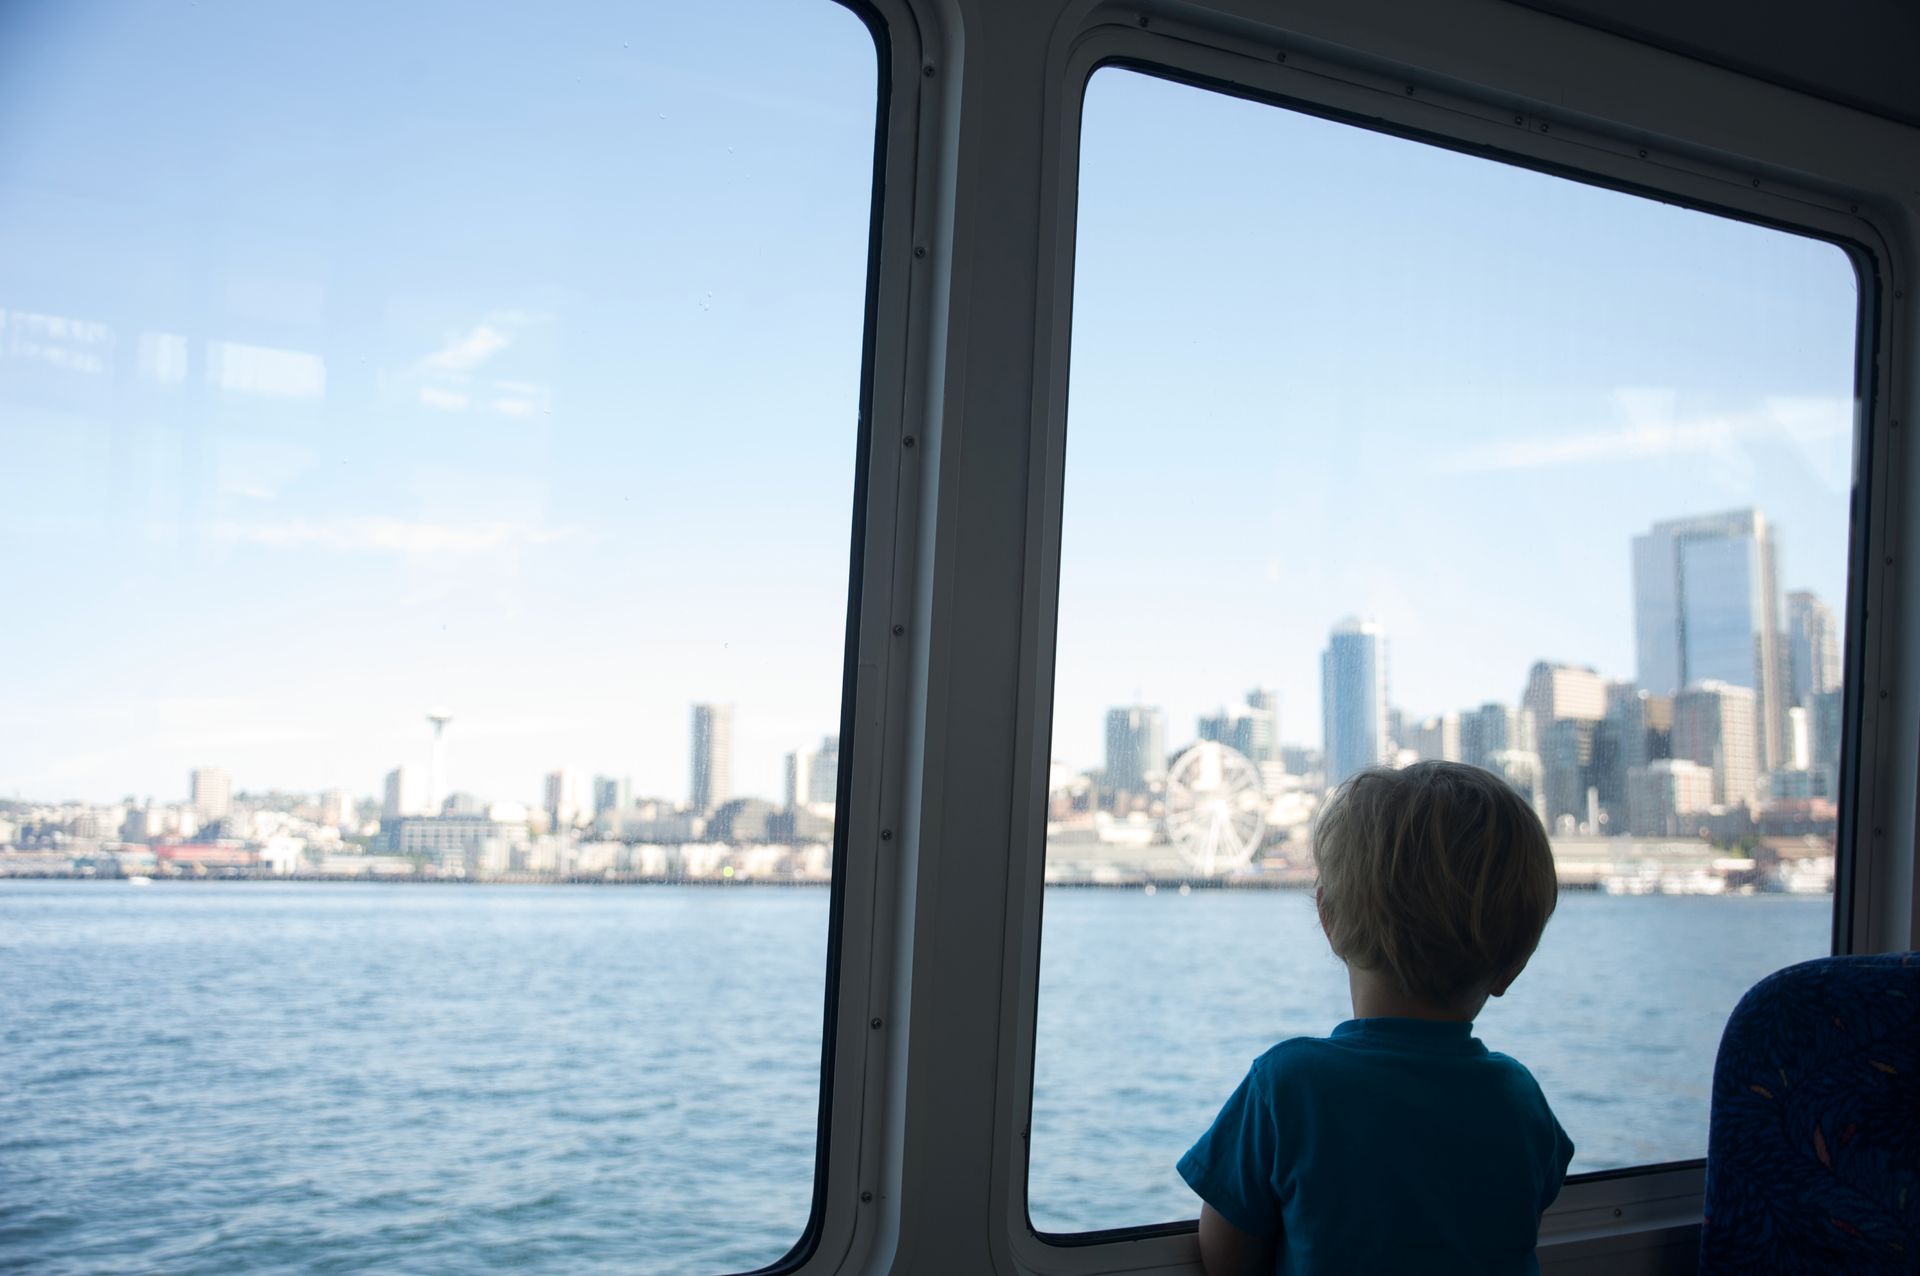 A young boy is looking out of a boat window at the city skyline.